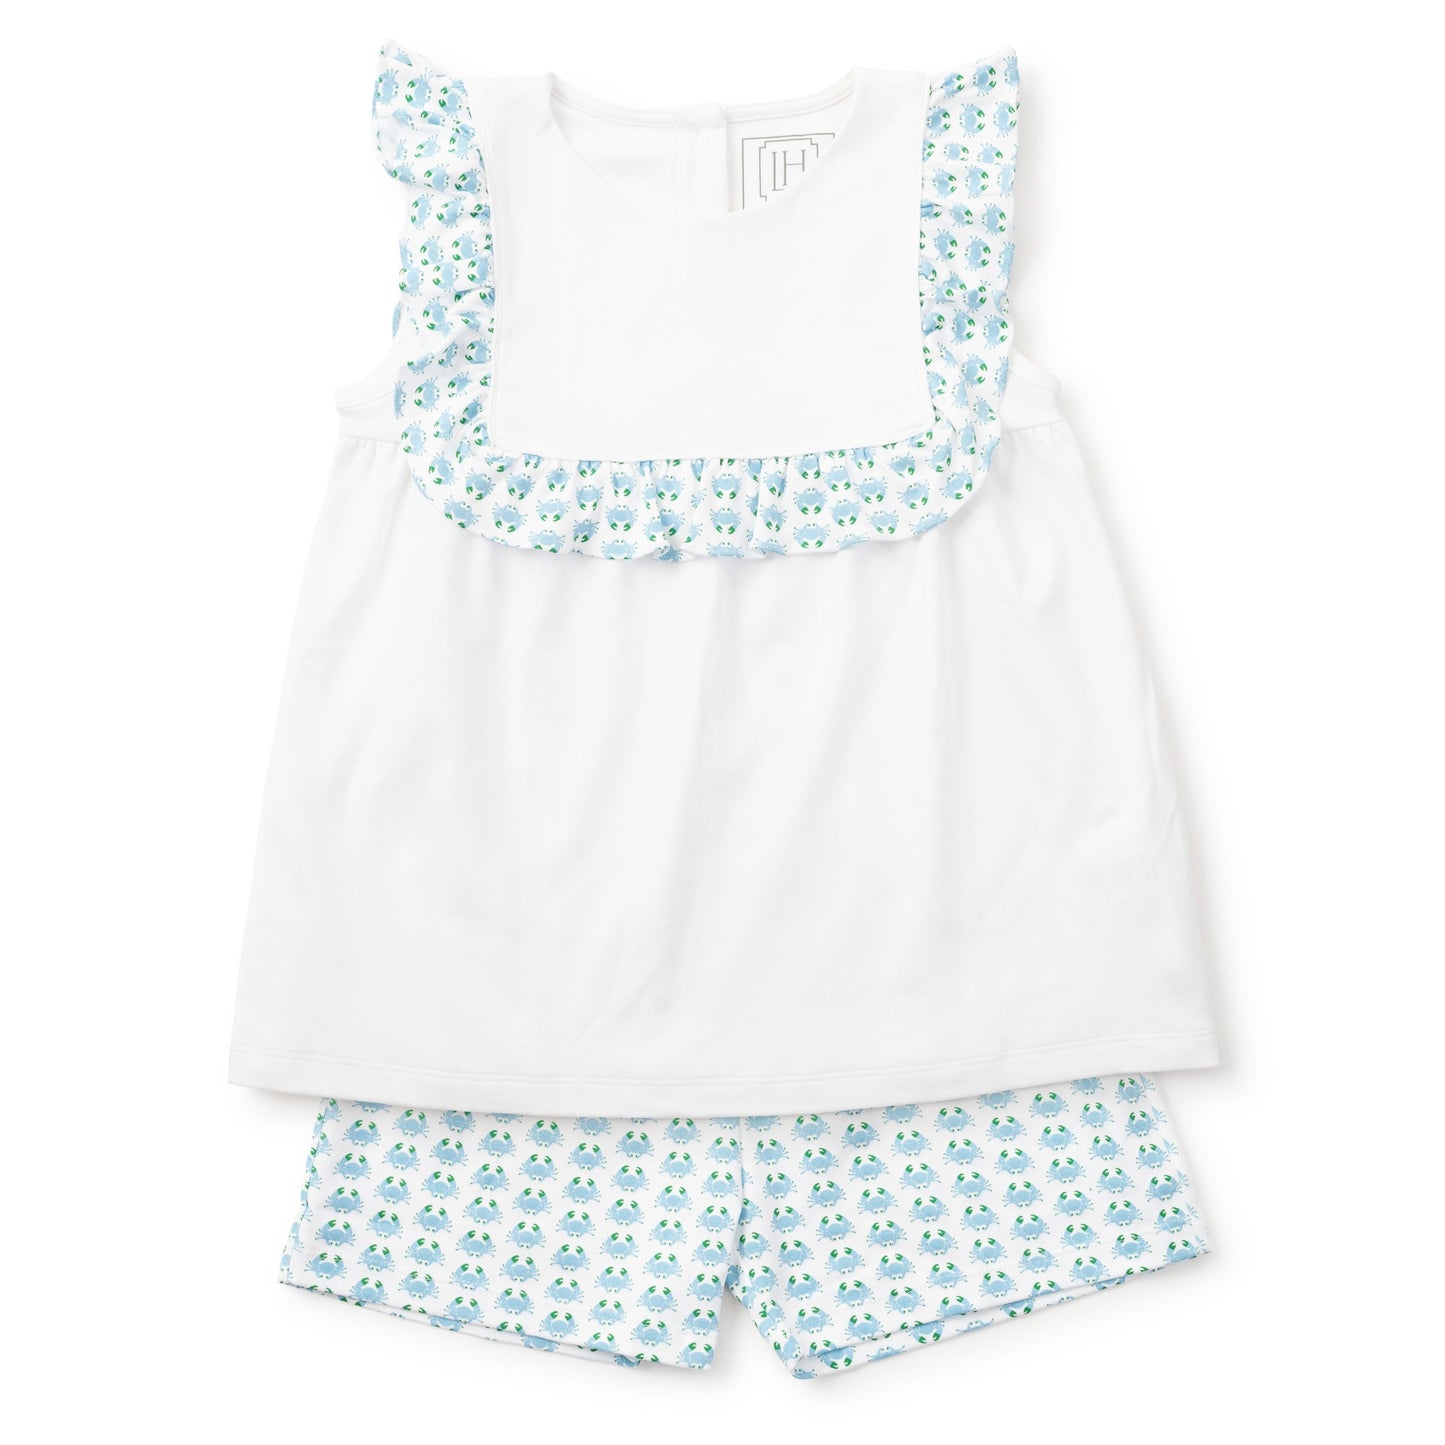 Lila and Hayes Penelope Girls' Pima Cotton Short Set - Cool Crabs